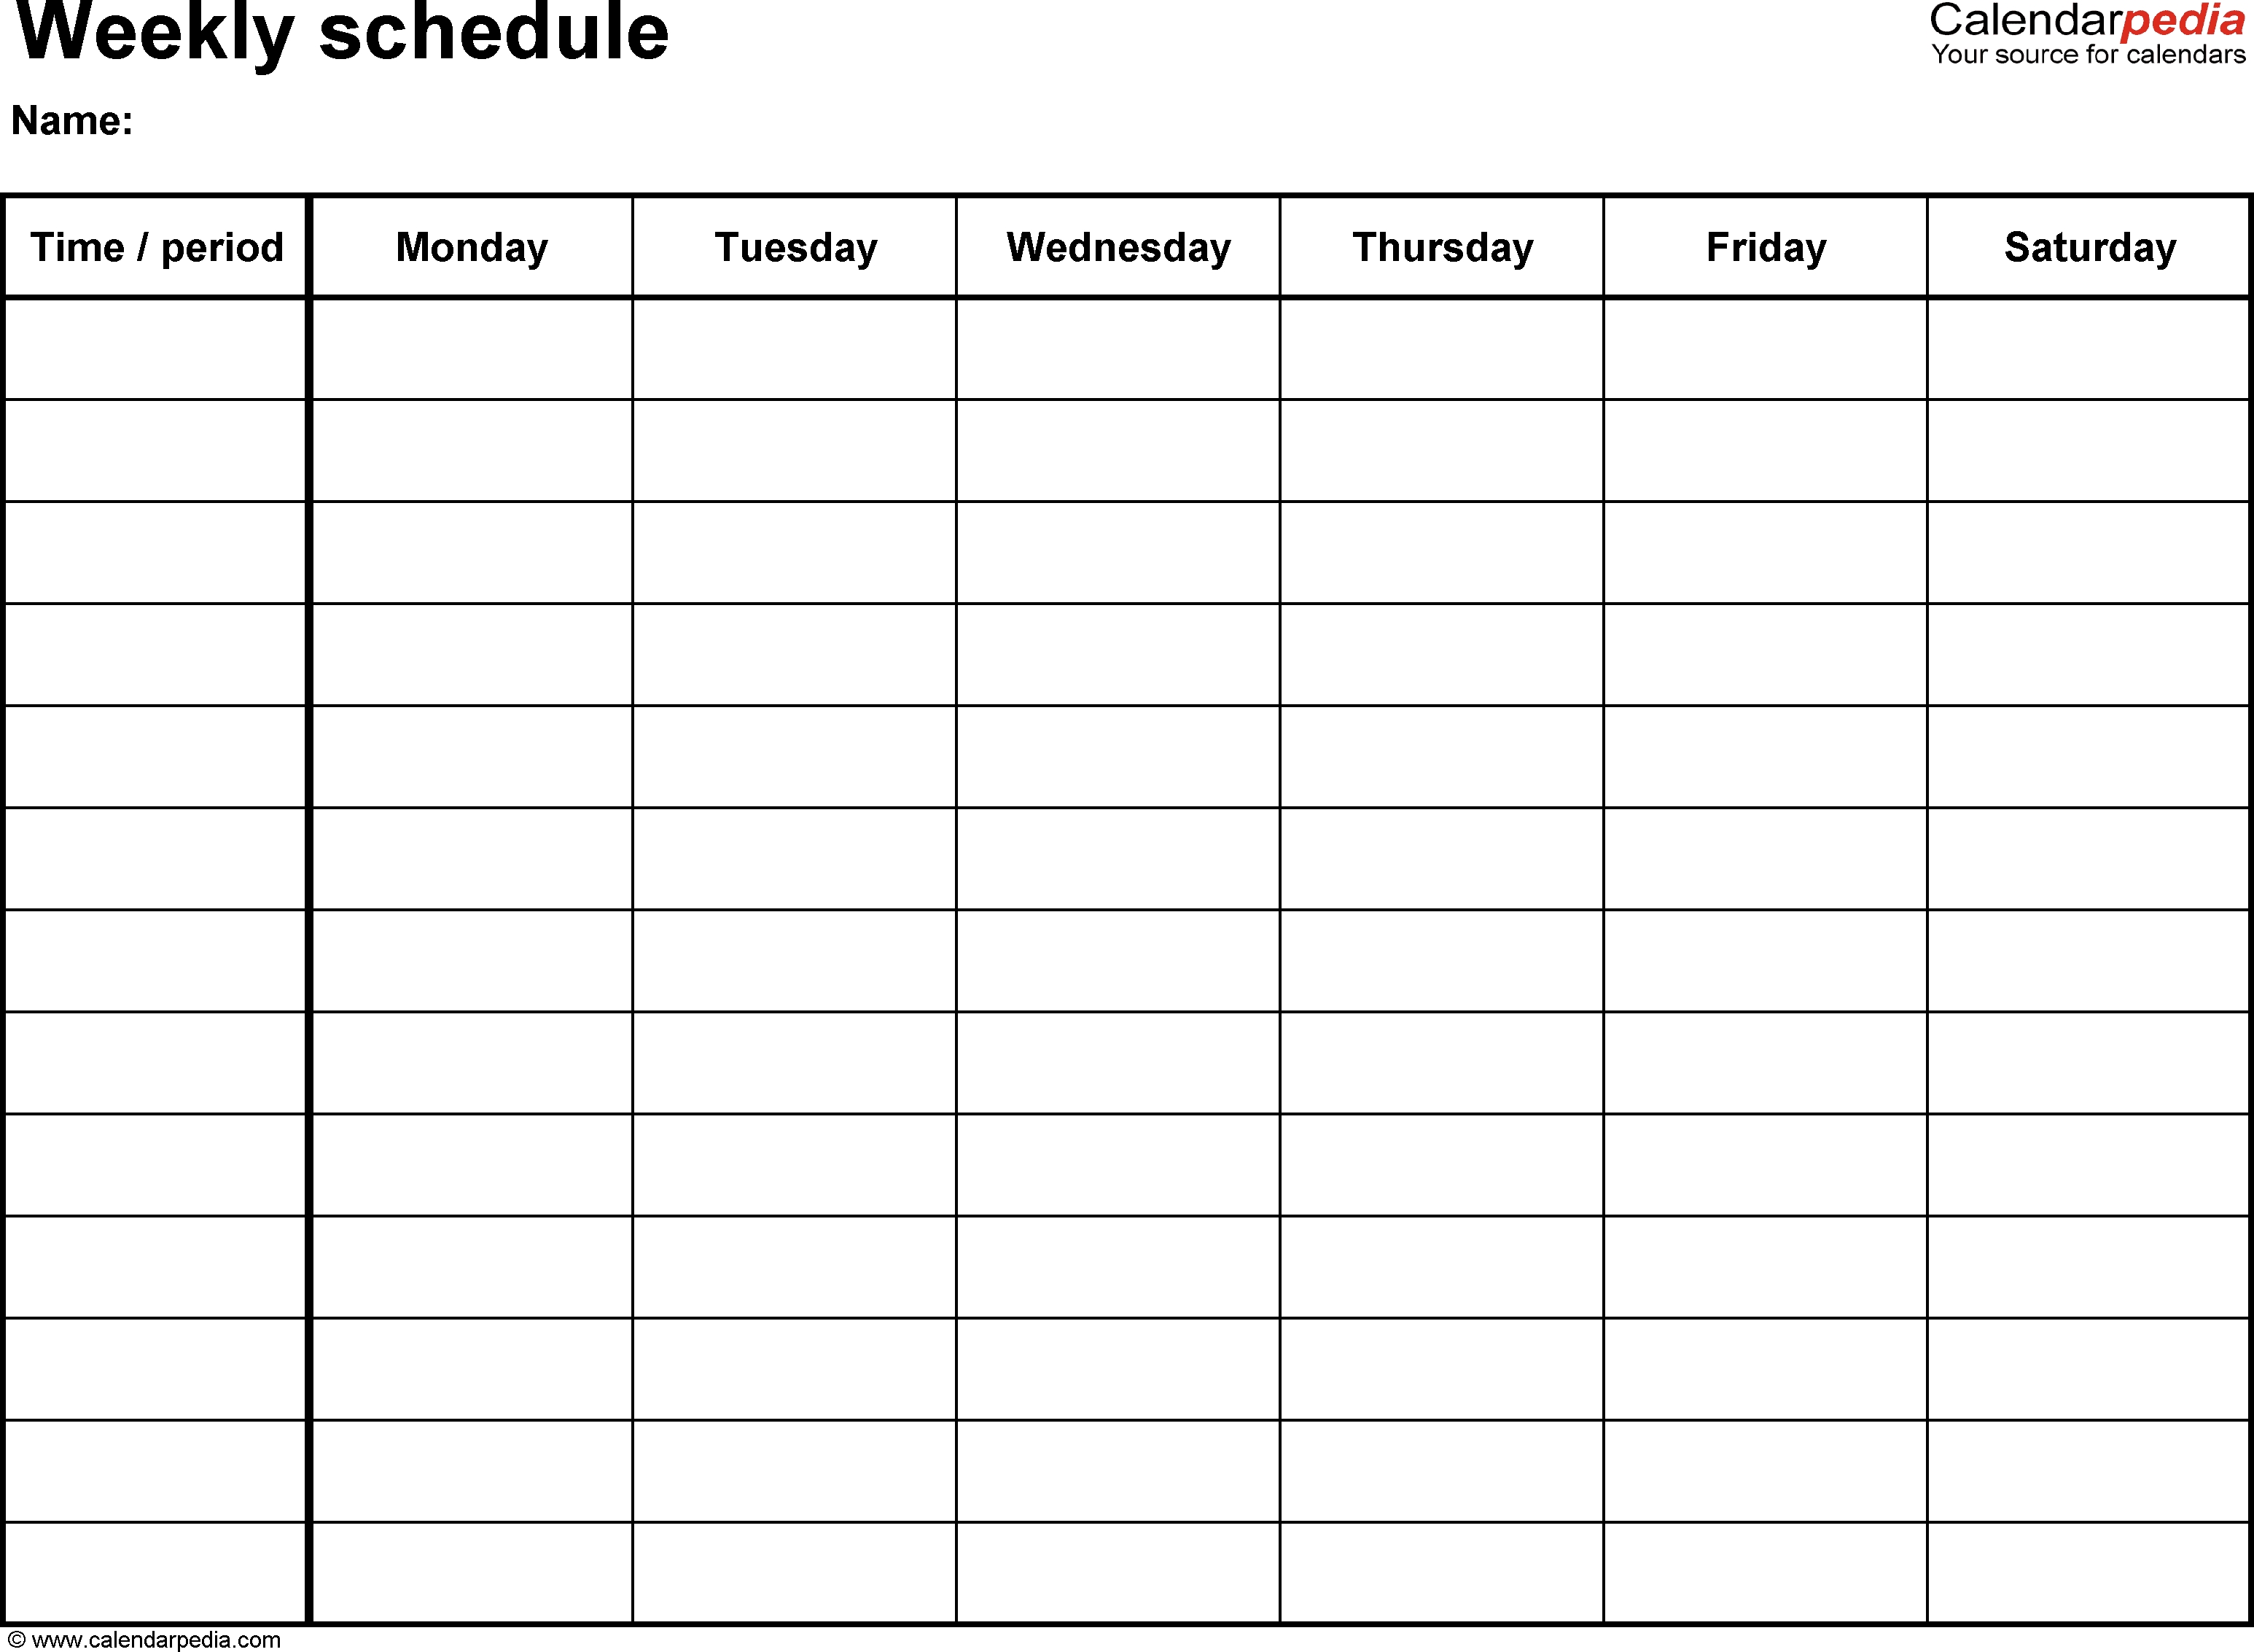 Free Weekly Schedule Templates For Word - 18 Templates Calendar By Week Template